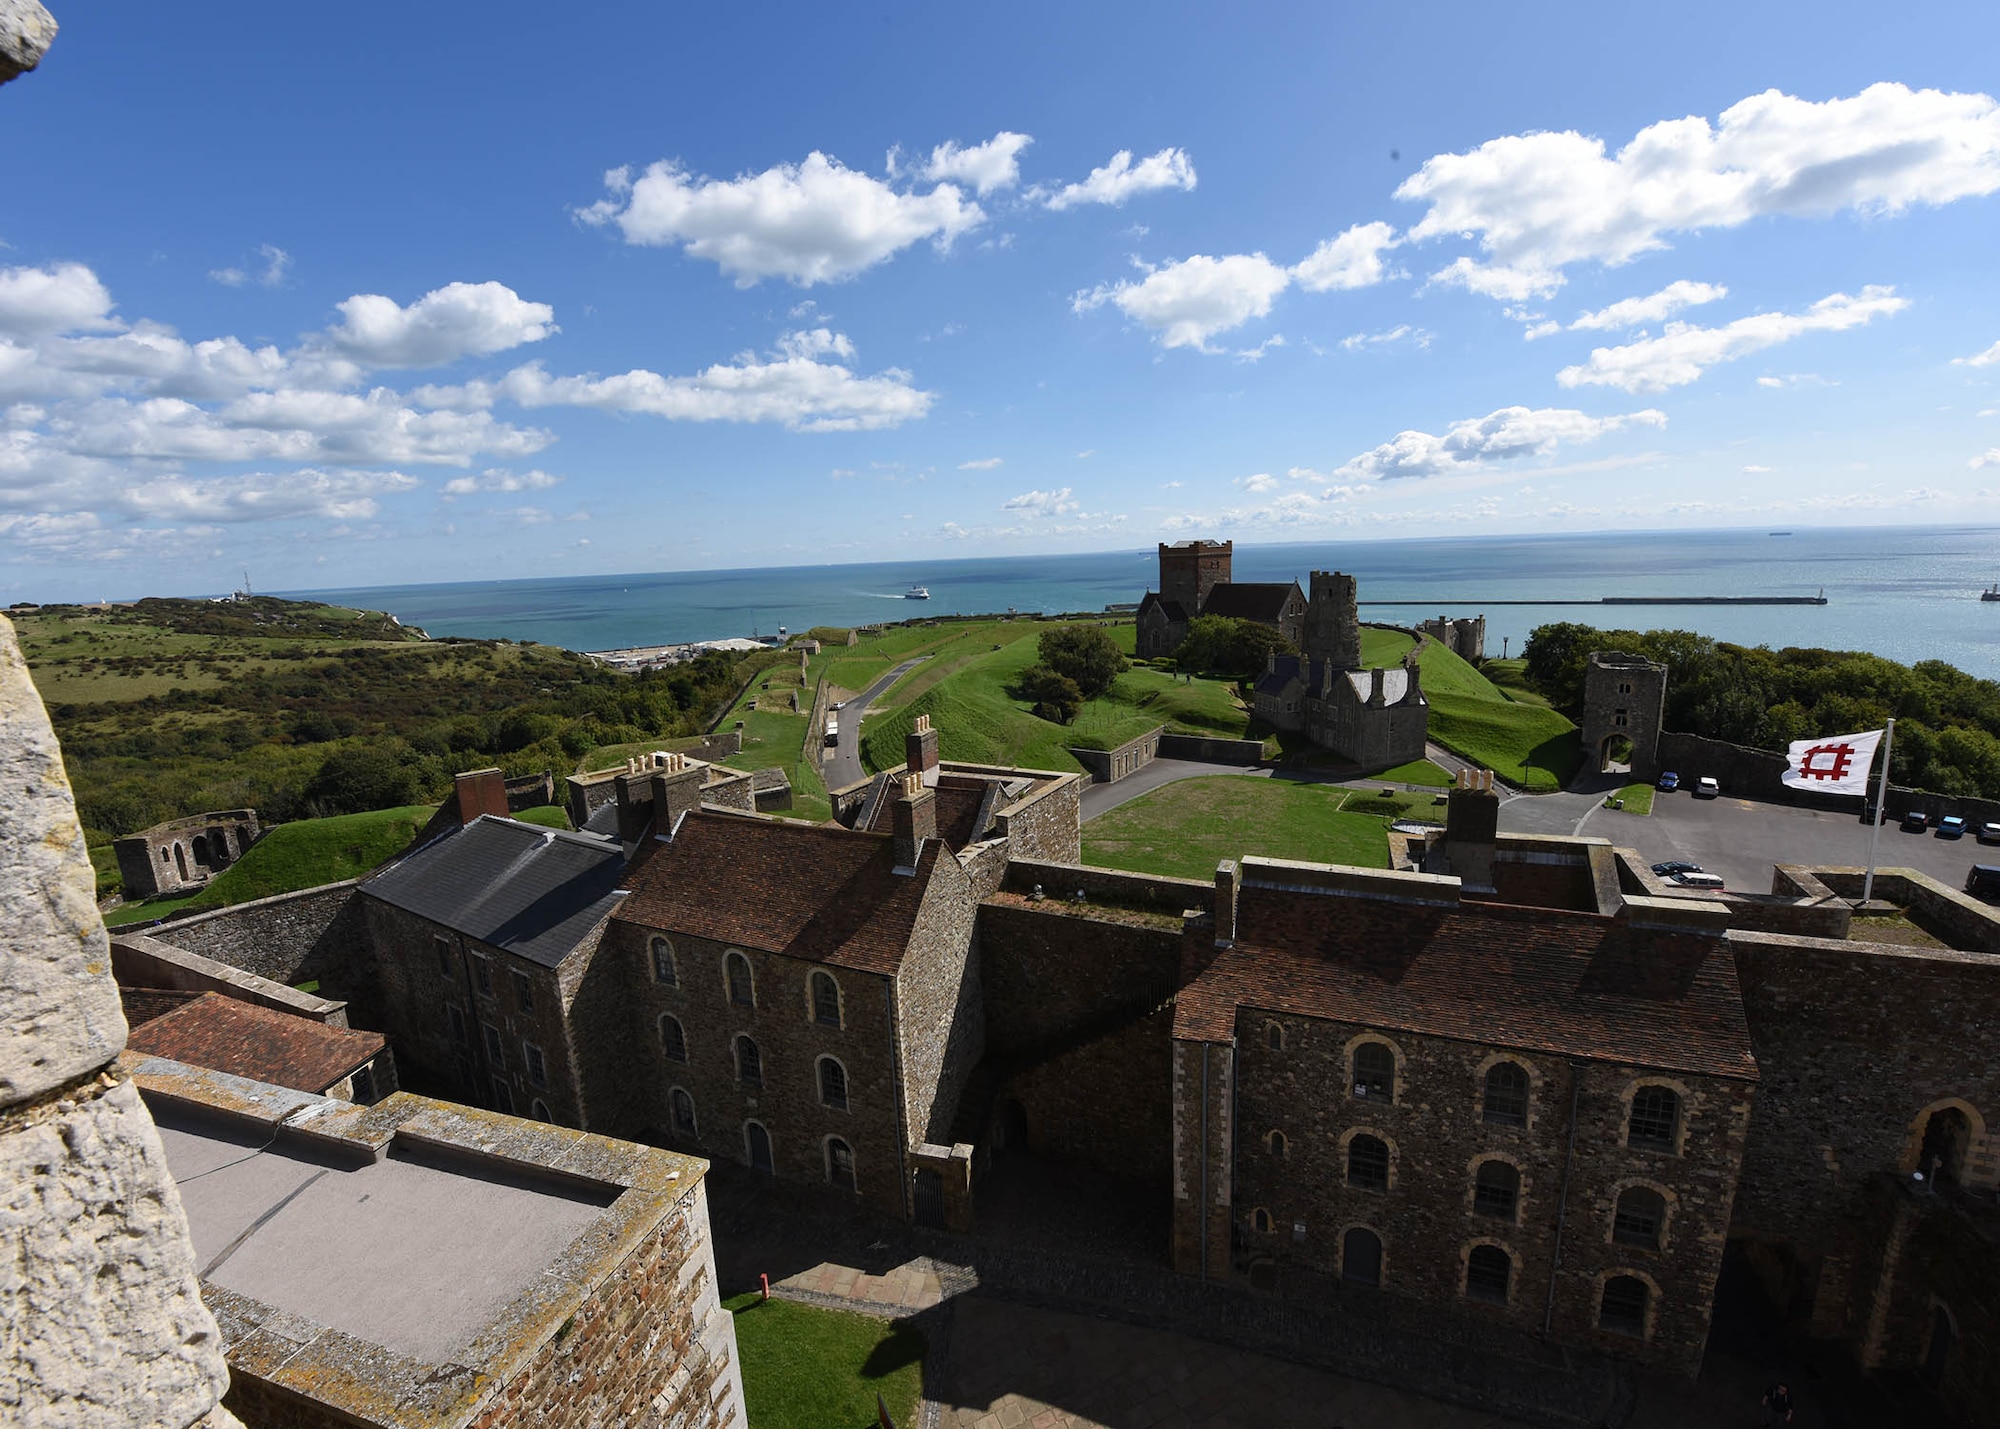 A view from the Great Tower during an RAF Mildenhall sponsored resiliency trip to Dover Castle in Dover, England, Sept. 7, 2018.  The resiliency trip offered an insight to the Airmen through the long history within its walls. (U.S. Air Force photo by Senior Airman Luke Milano)